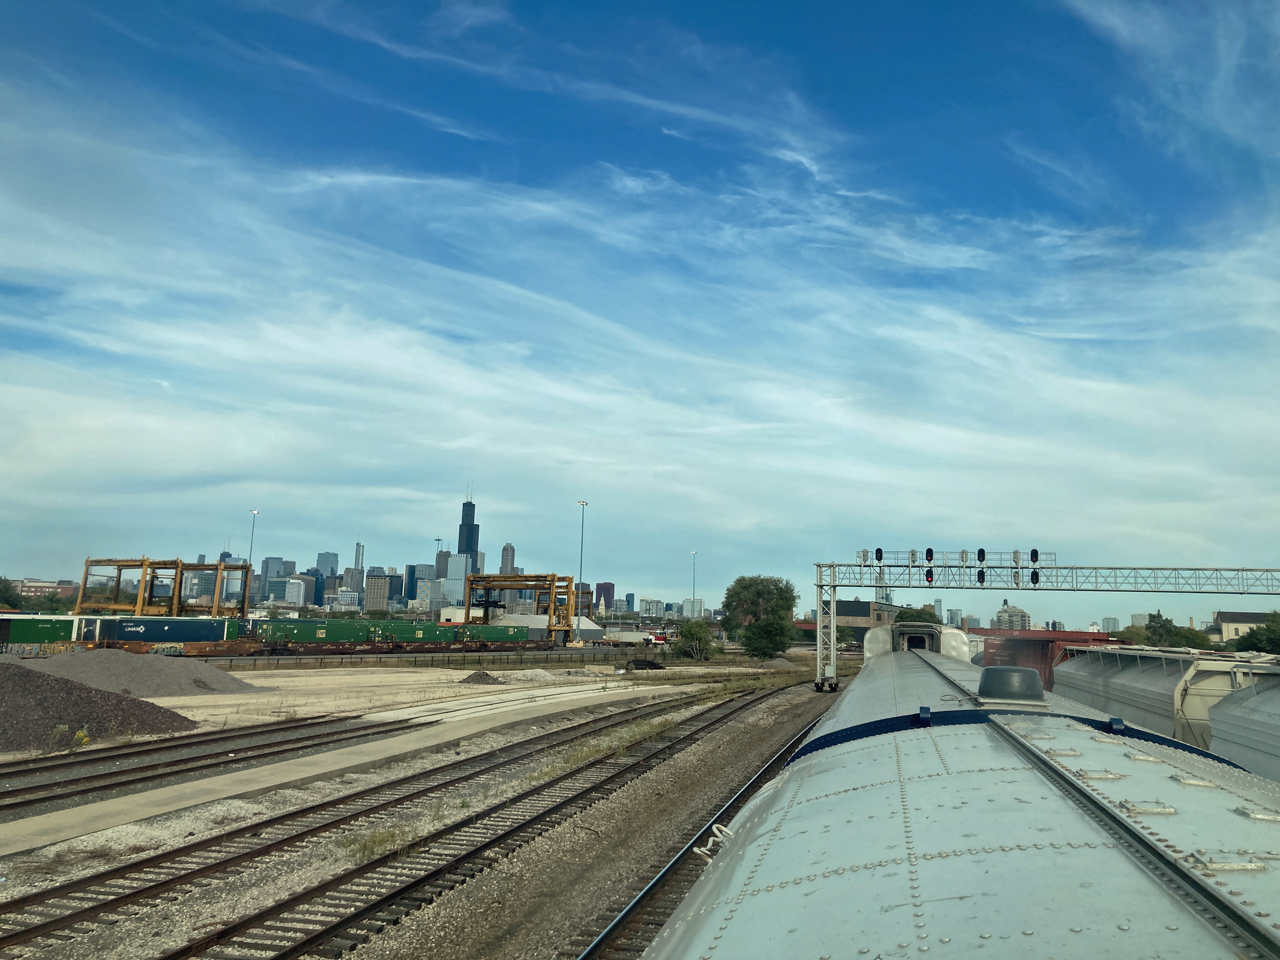 Pulling into Chicago